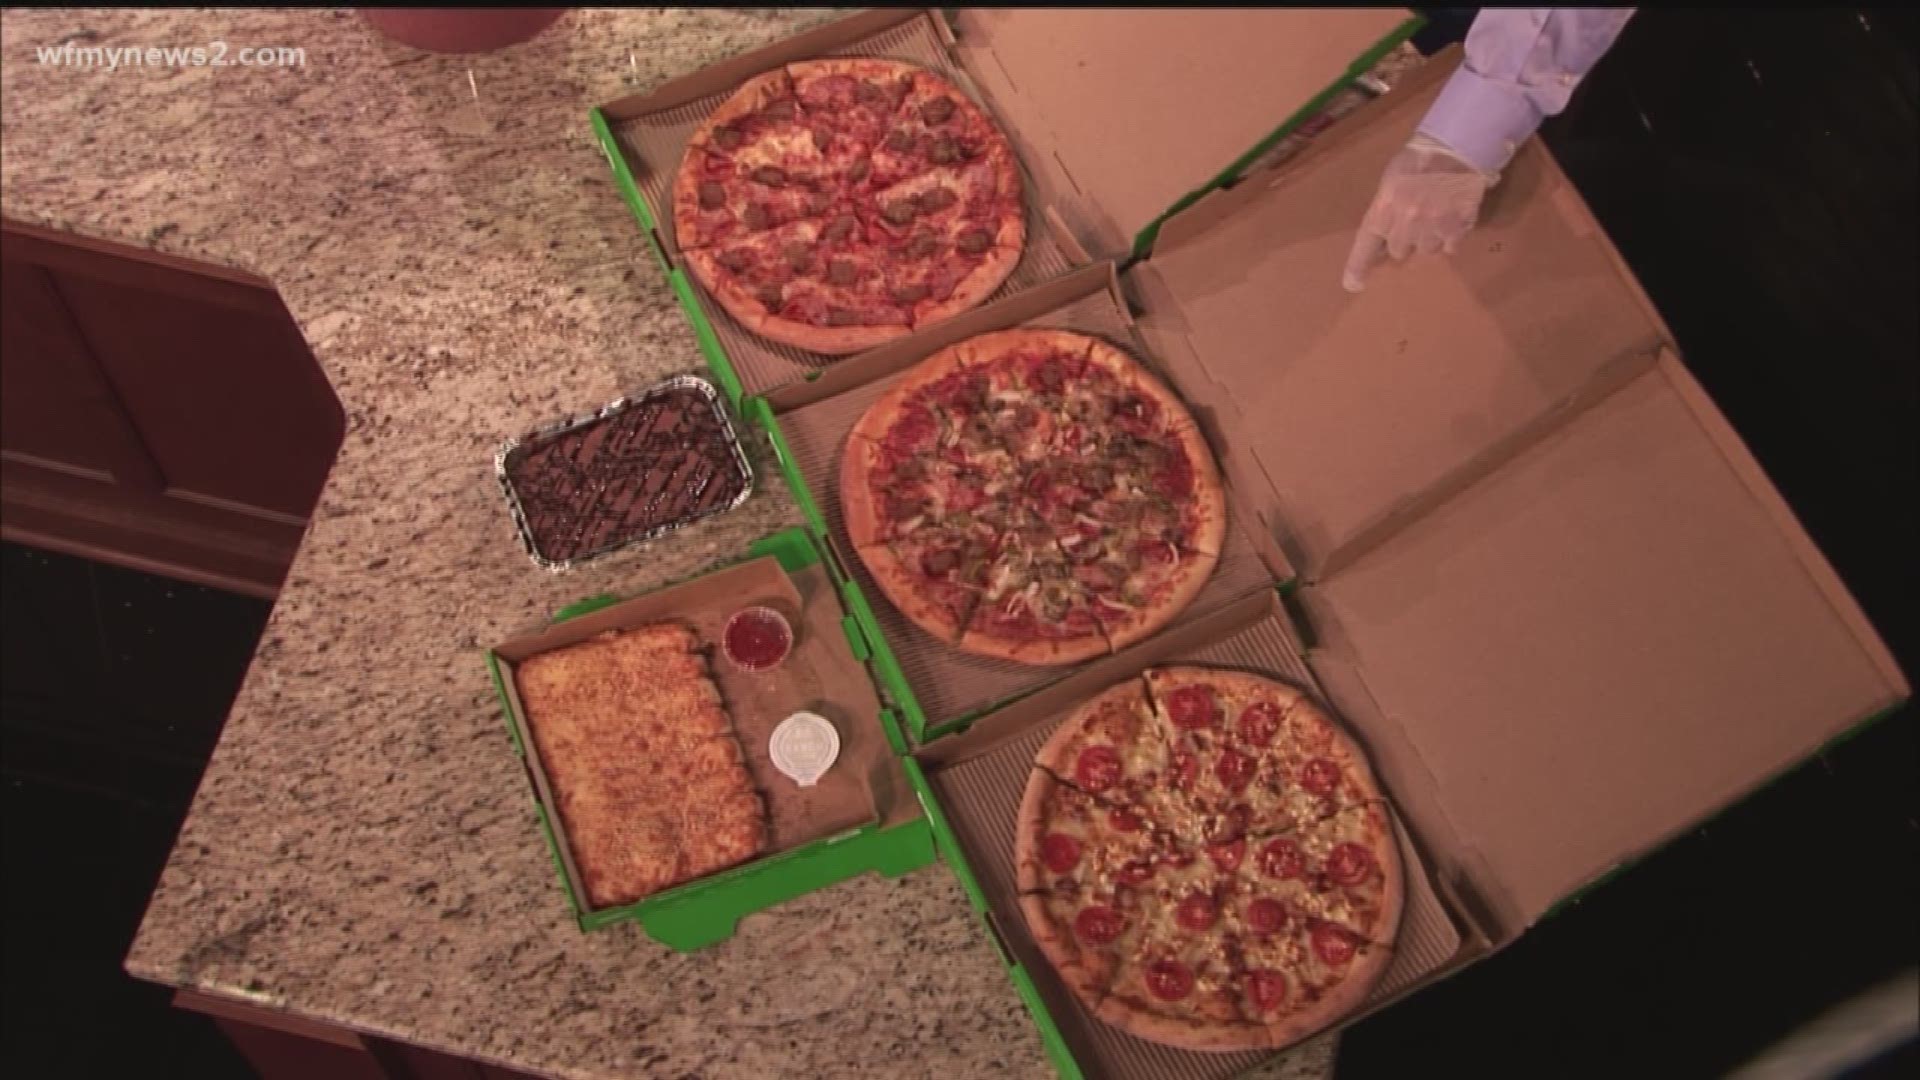 The pizza chain continues to grow in the Triad, opening the latest store in High Point.